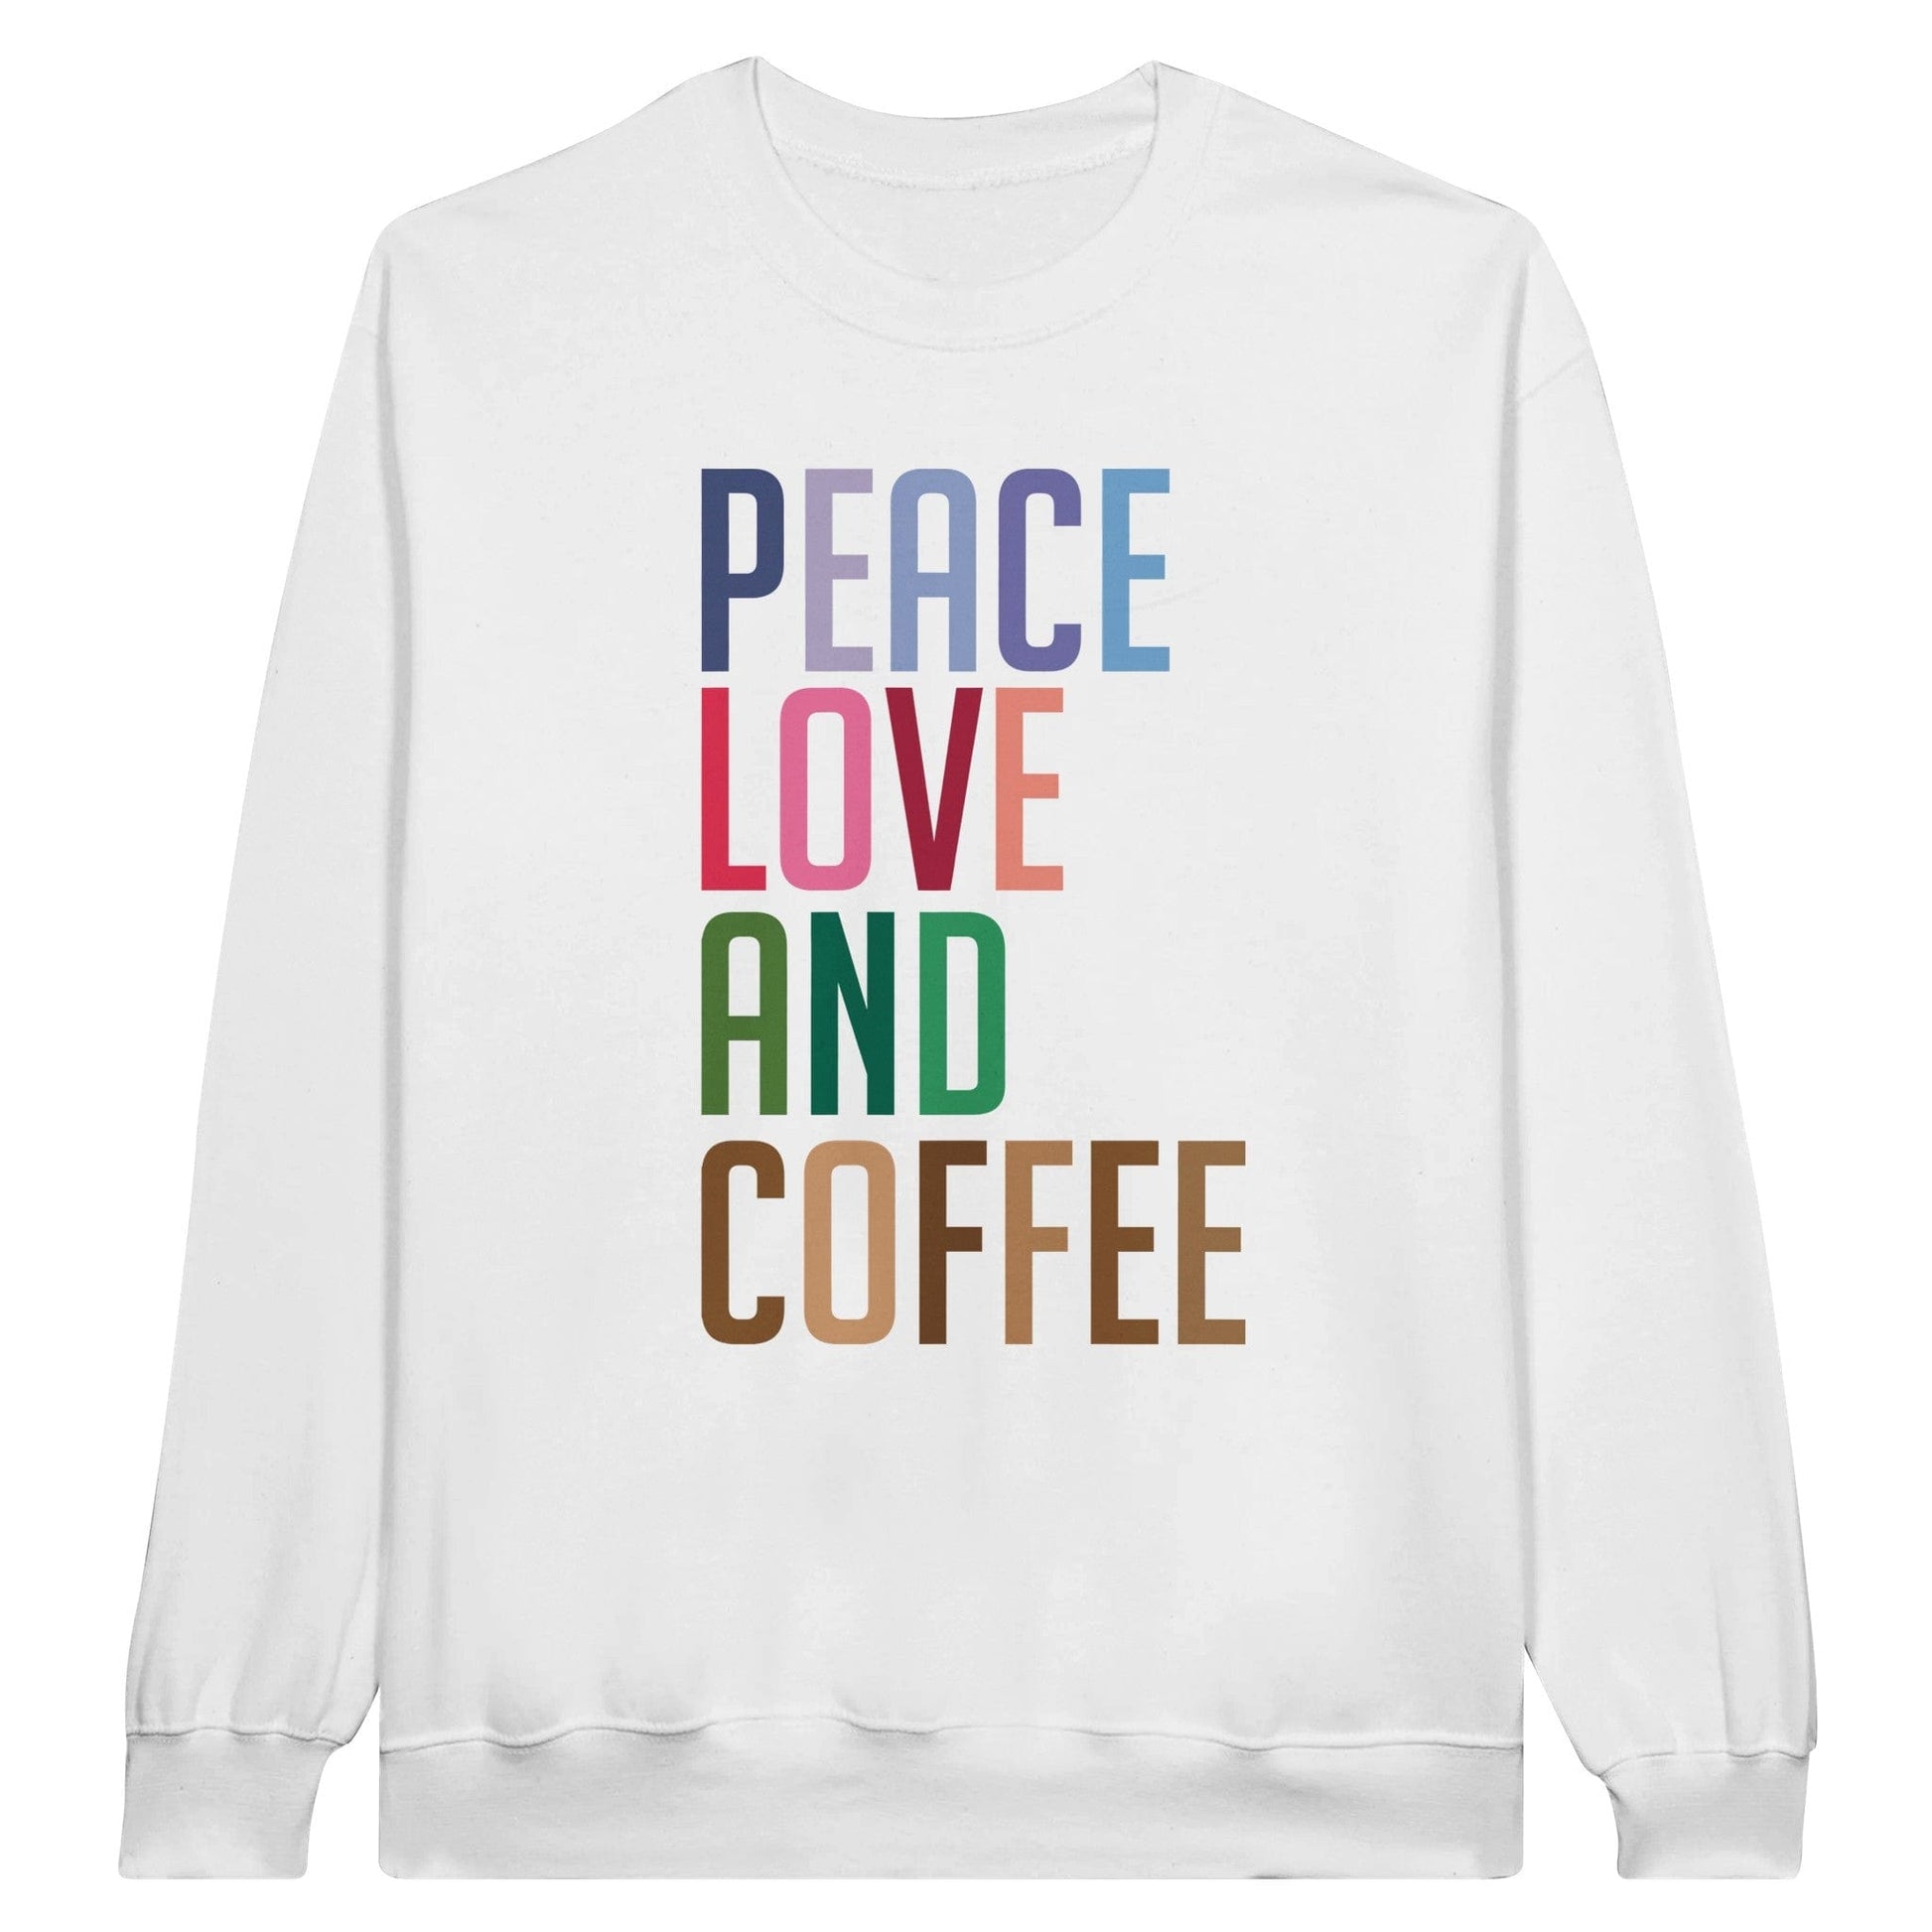 Good Bean Gifts Copy of "Peace Love and Coffee" - Classic Unisex Crewneck Sweatshirt S / White